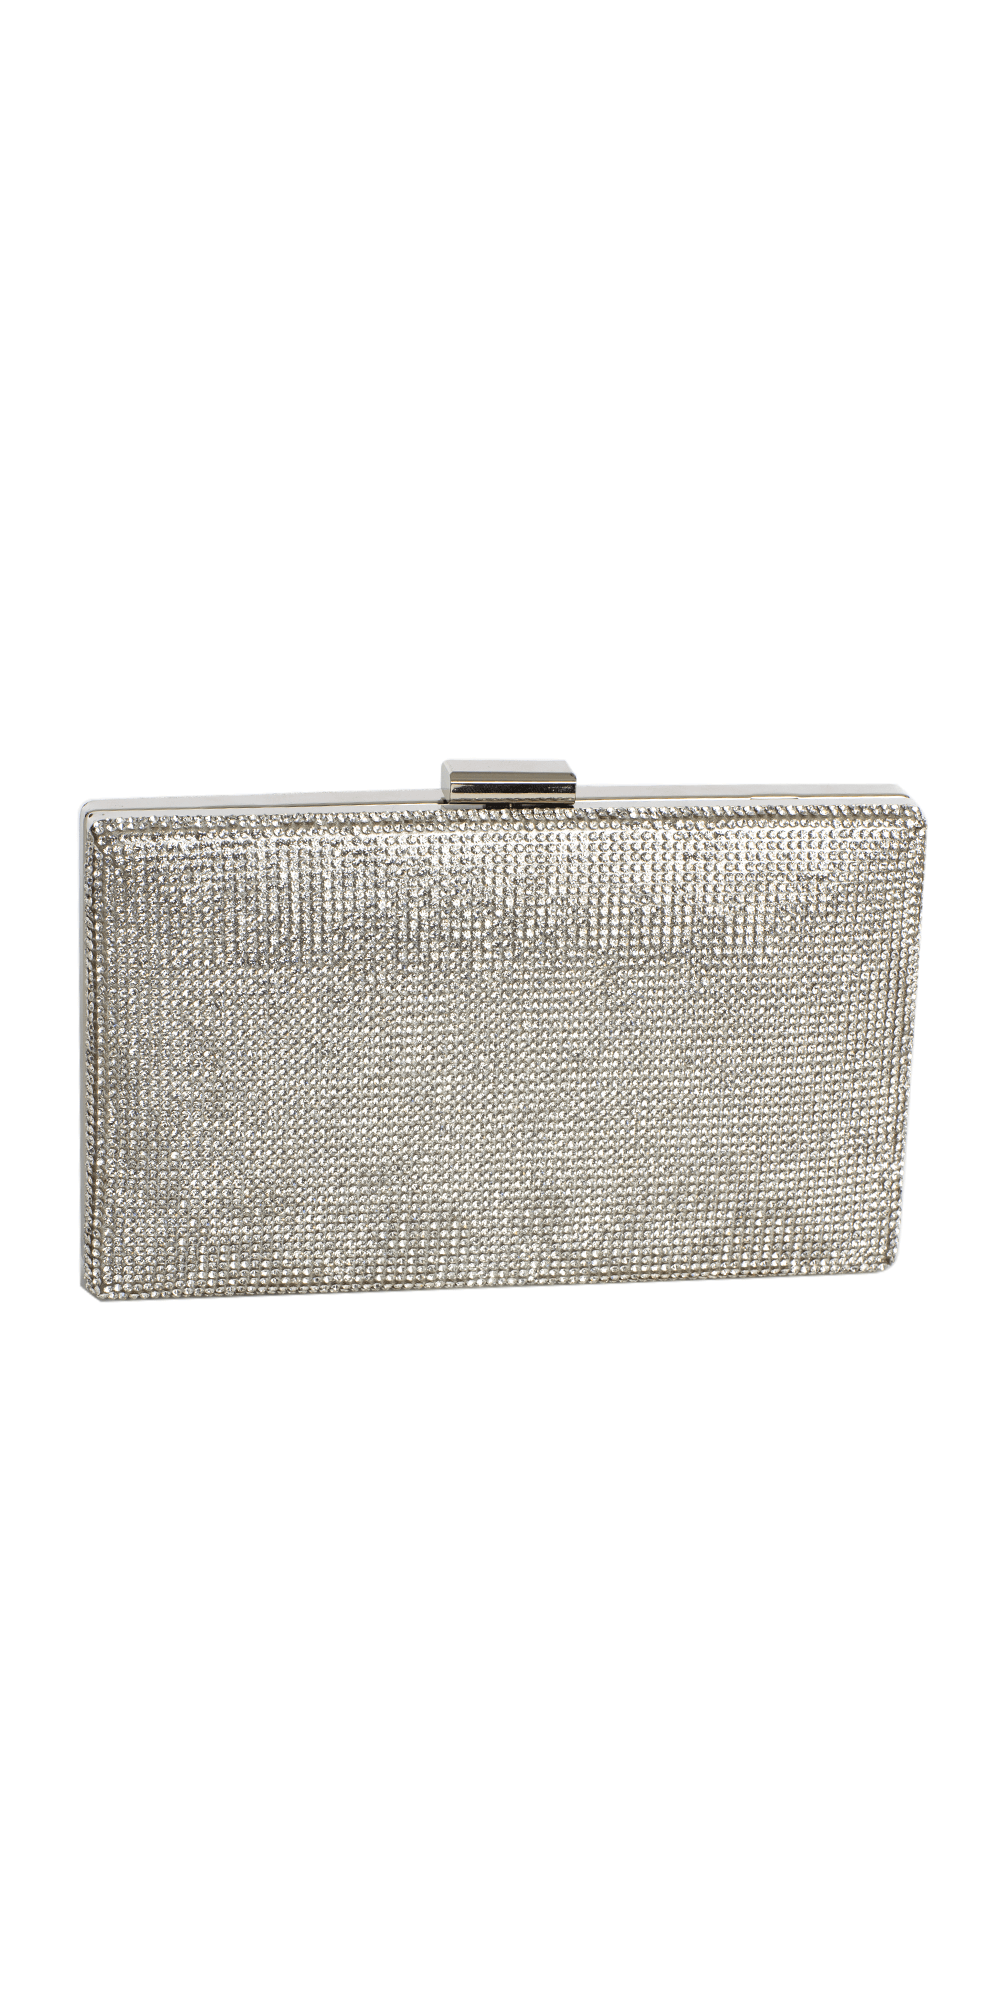 Vintage Shiny Silver Faux Leather Evening Bag, Clutch B223 - Etsy